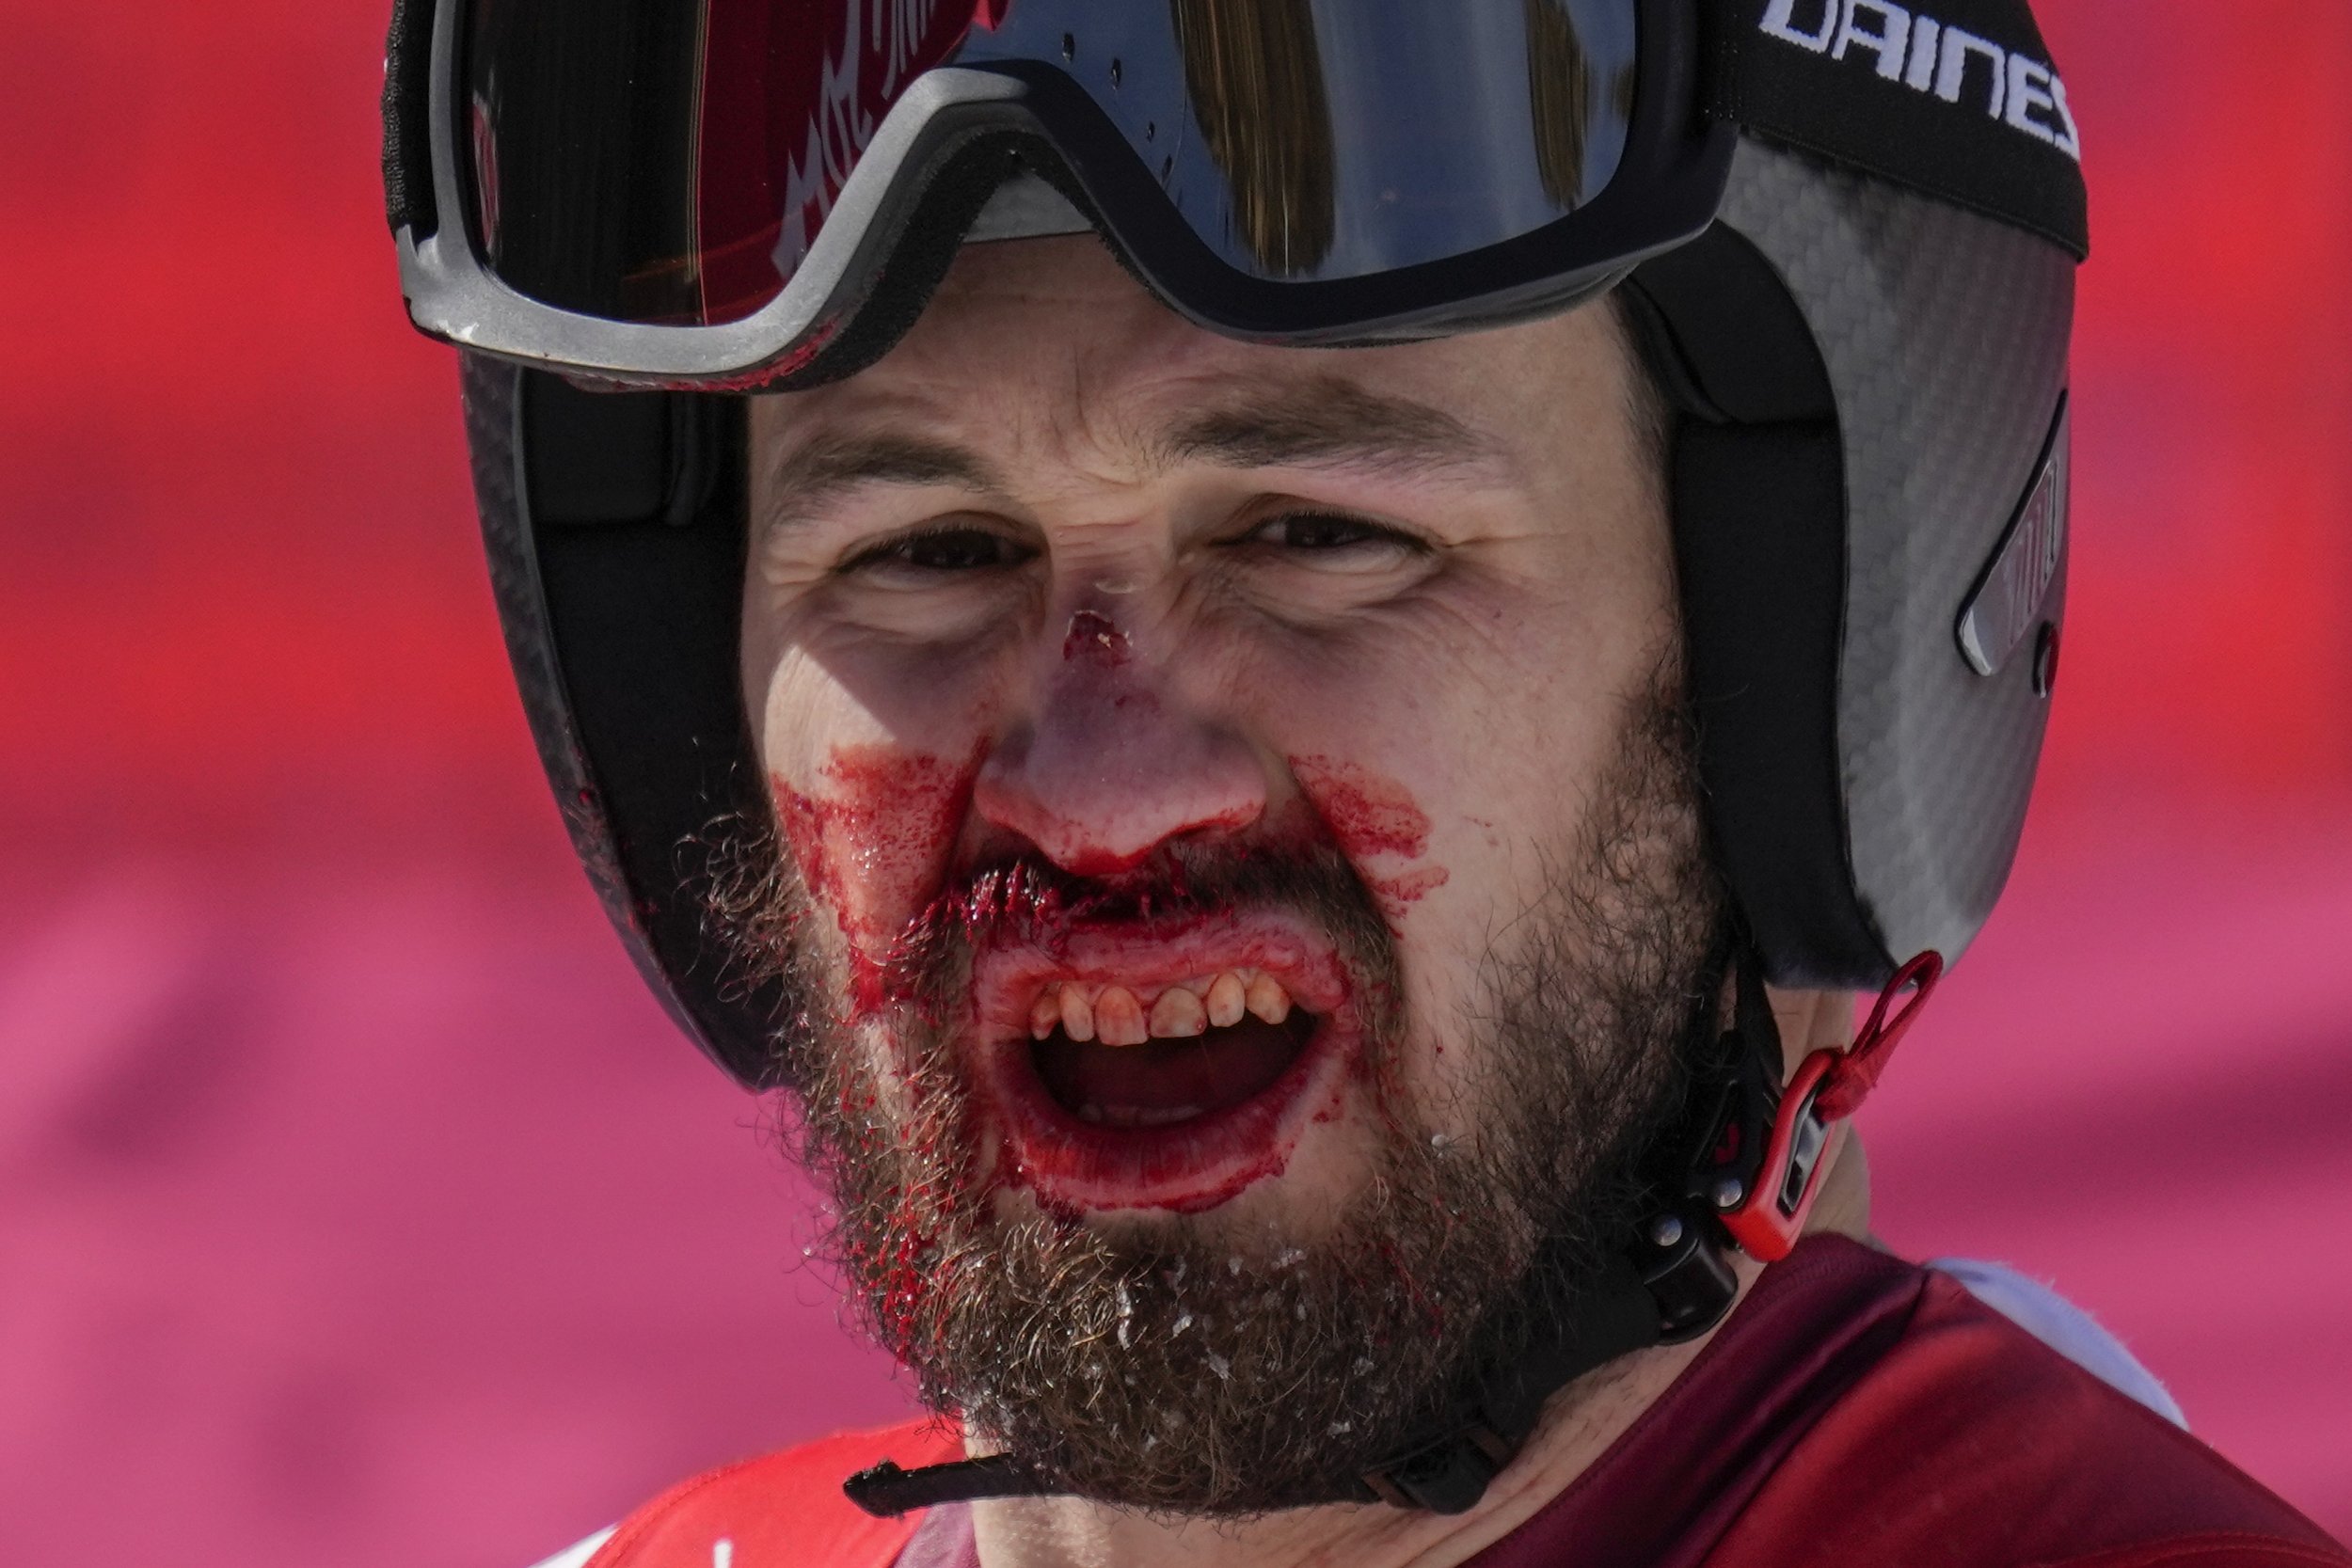  Daniel Hemetsberger, of Austria, bleeds after finishing the men's downhill at the 2022 Winter Olympics, Monday, Feb. 7, 2022, in the Yanqing district of Beijing.(AP Photo/Luca Bruno) 